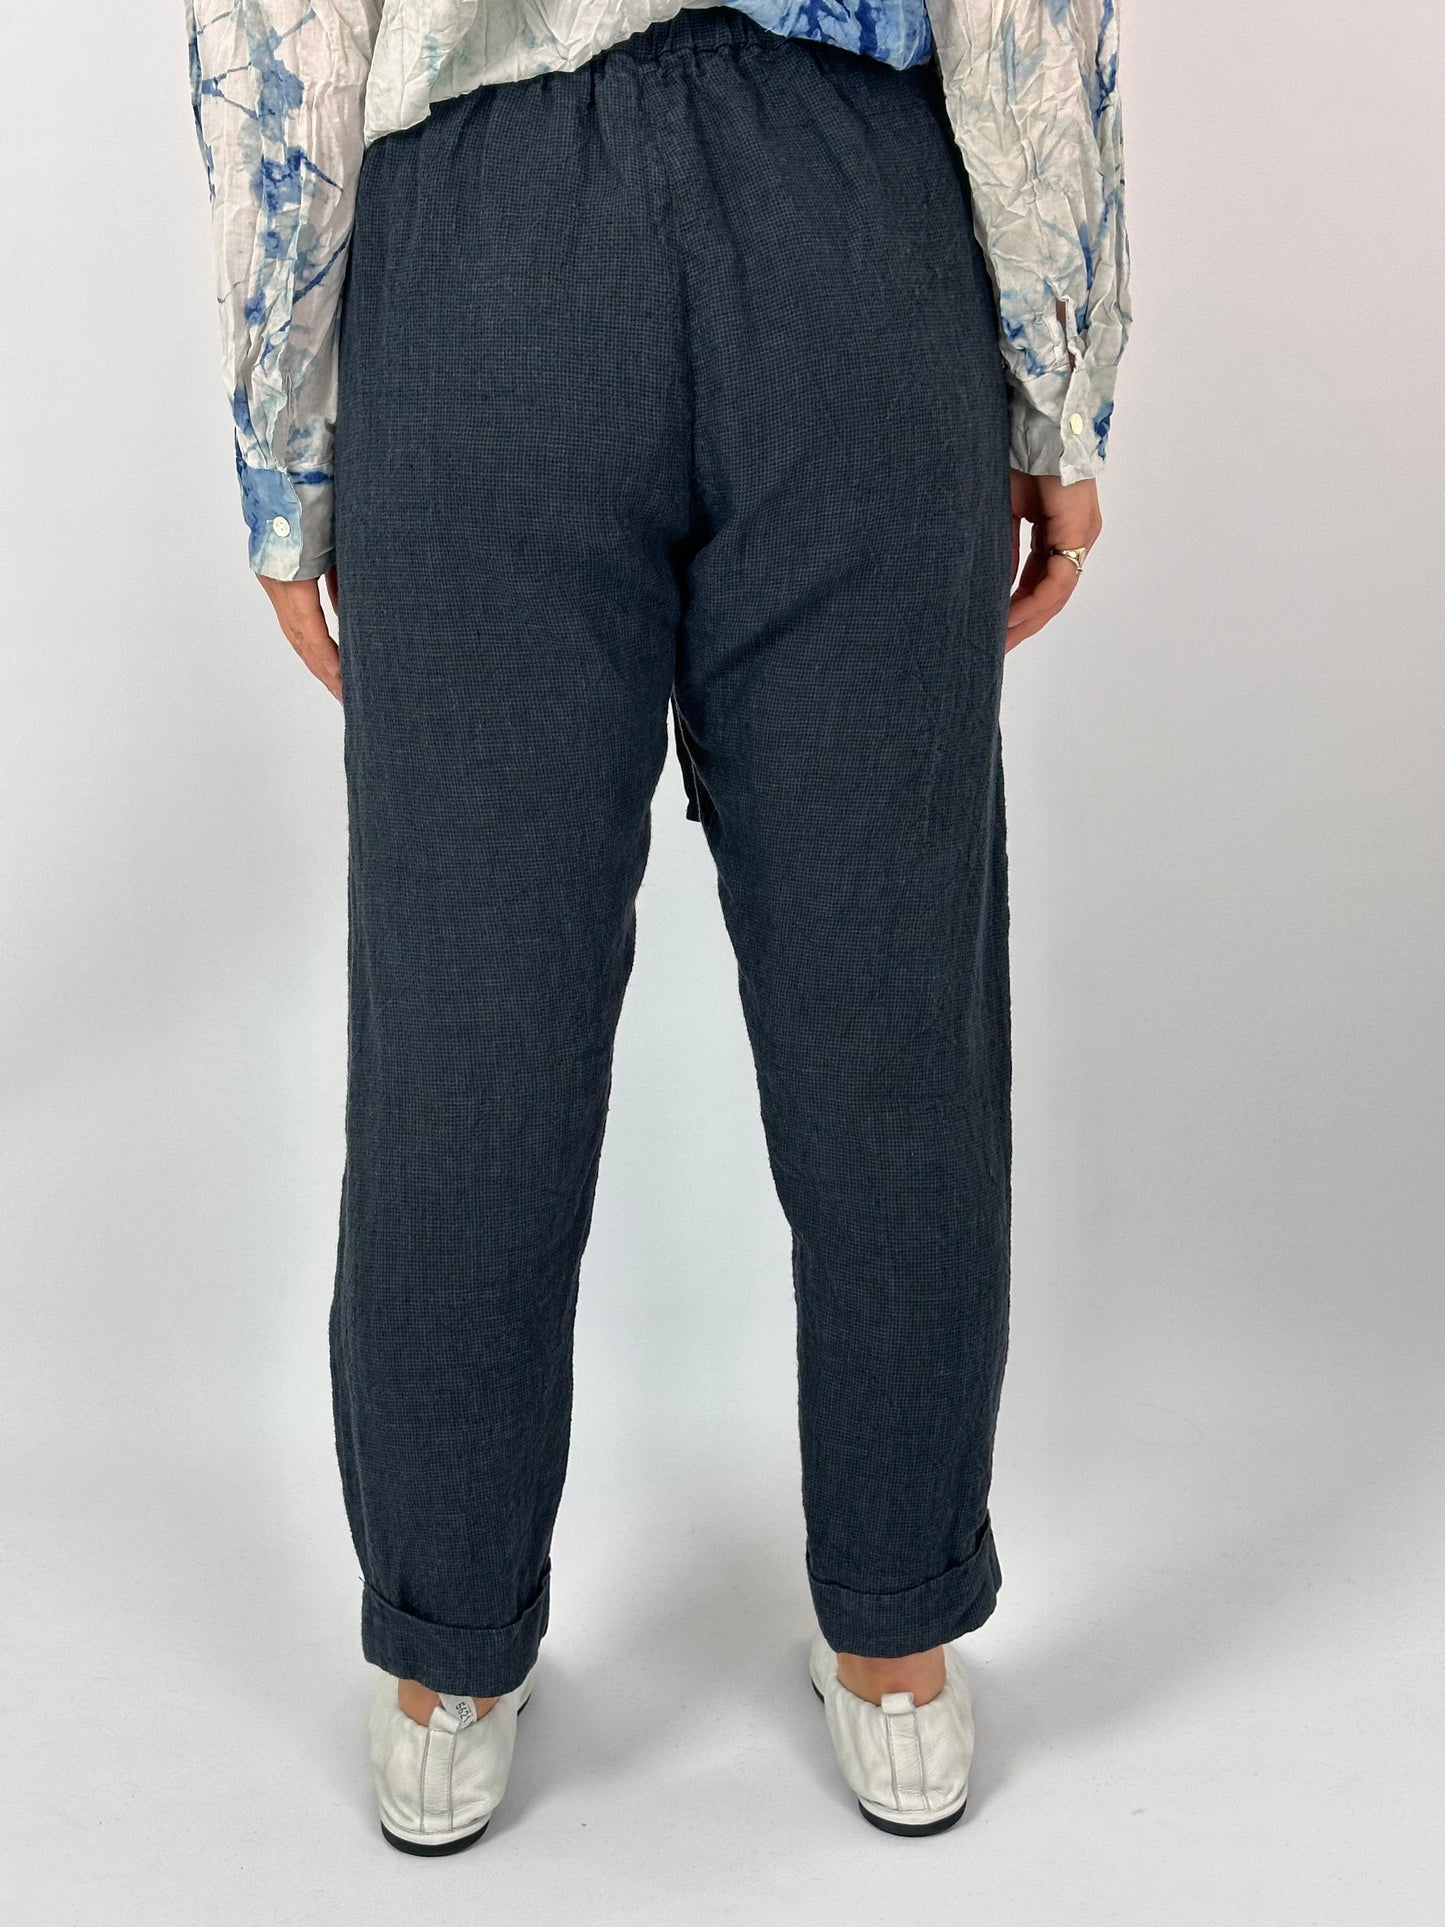 PDC 8402 Cuffed Trousers Charcoal